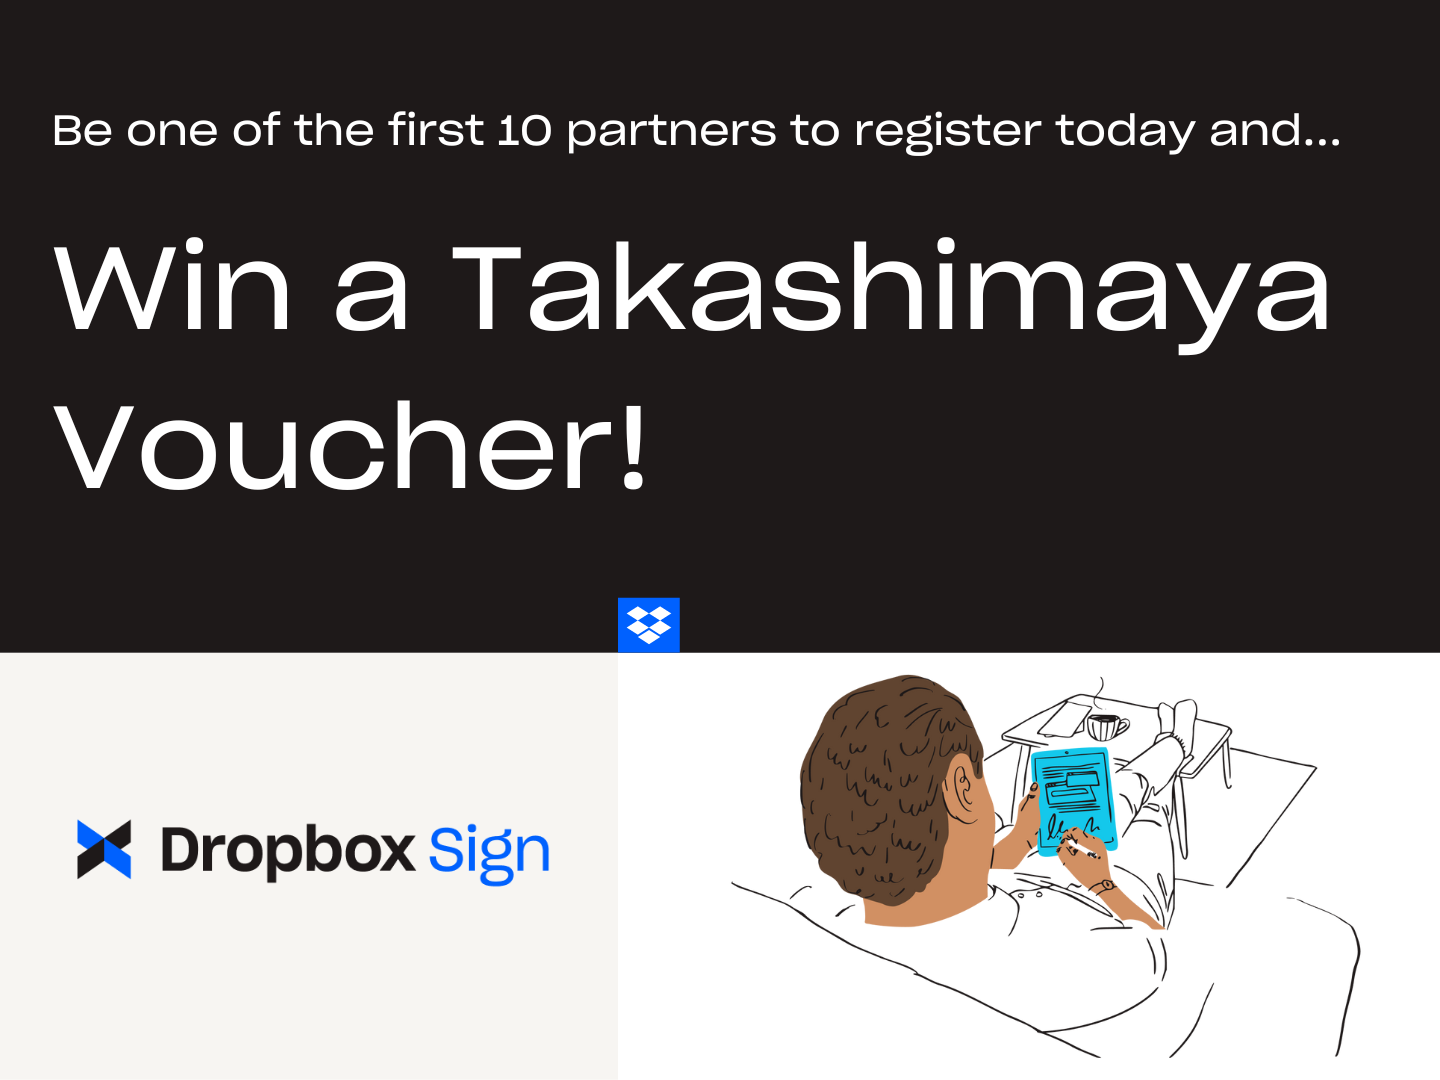 Be one of the first 10 partners to register today and win a Takashimaya voucher!